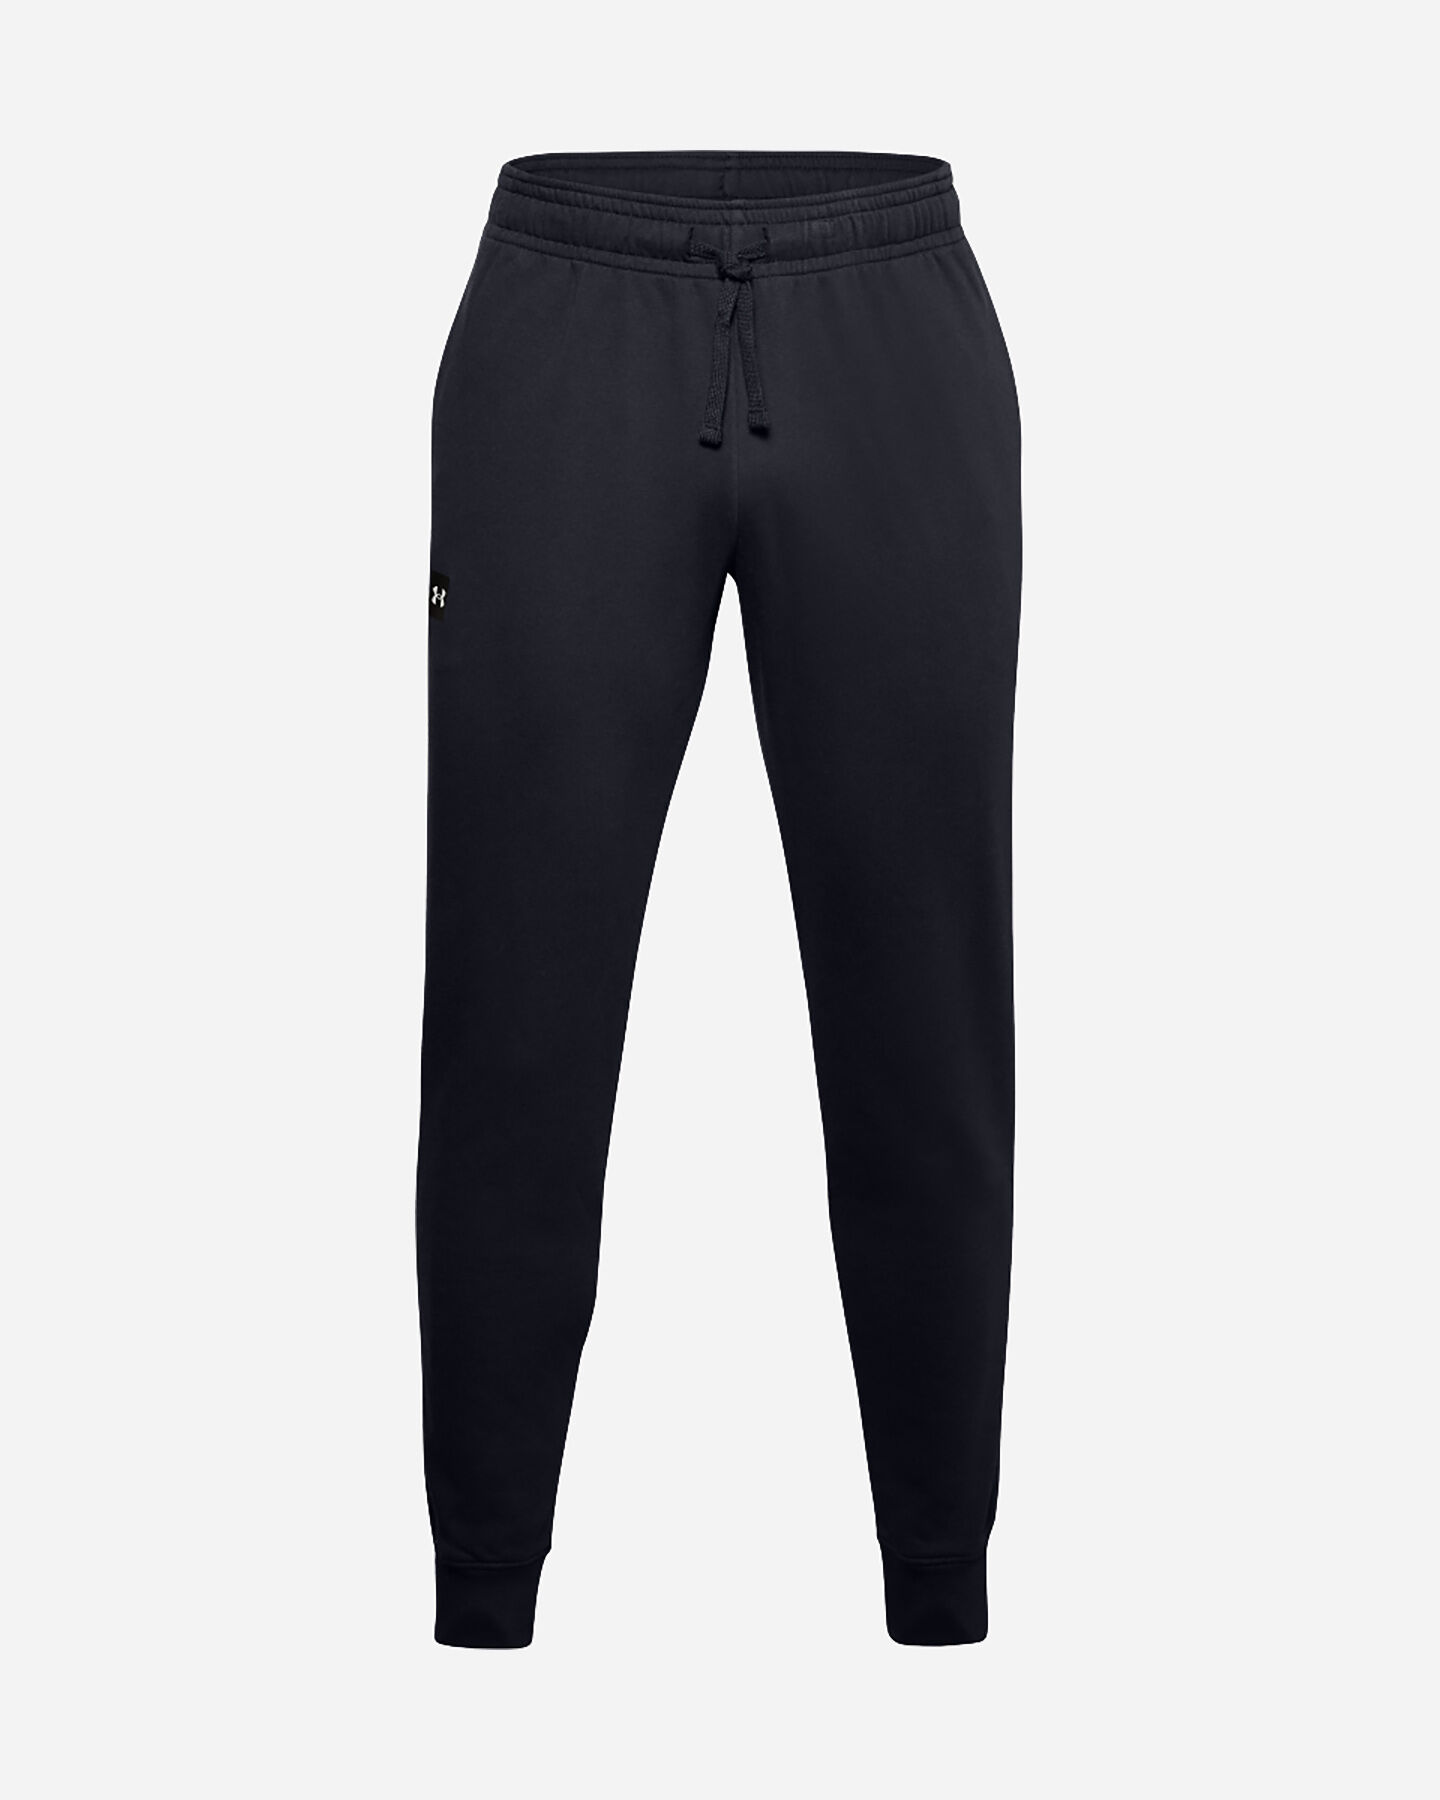  Pantalone UNDER ARMOUR RIVAL M S5229606|0001|XS scatto 0